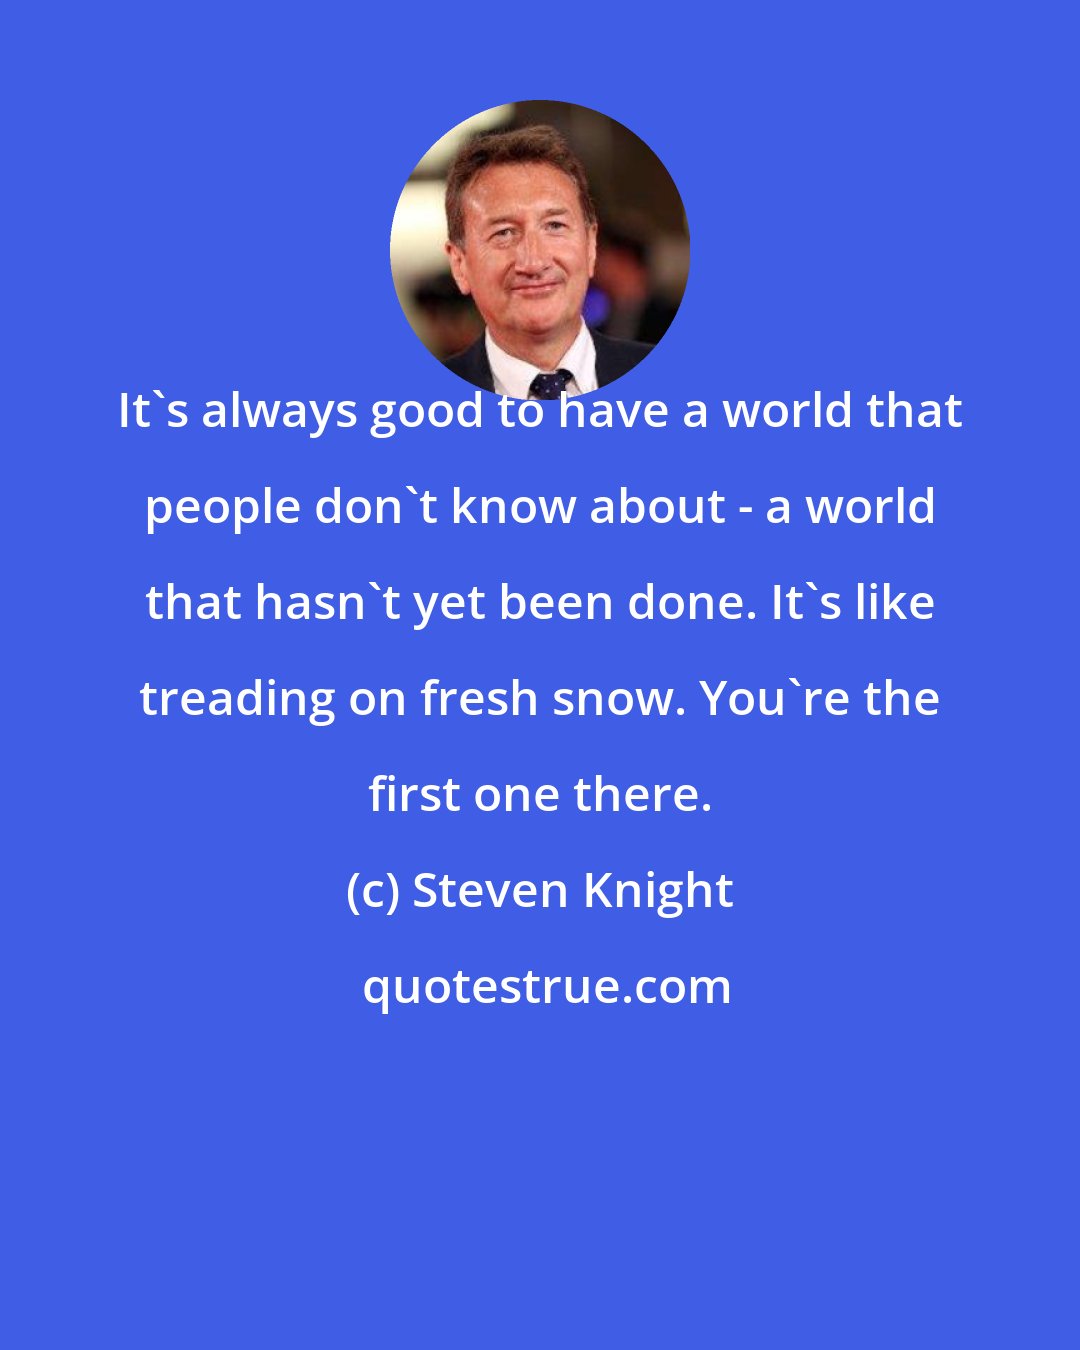 Steven Knight: It's always good to have a world that people don't know about - a world that hasn't yet been done. It's like treading on fresh snow. You're the first one there.